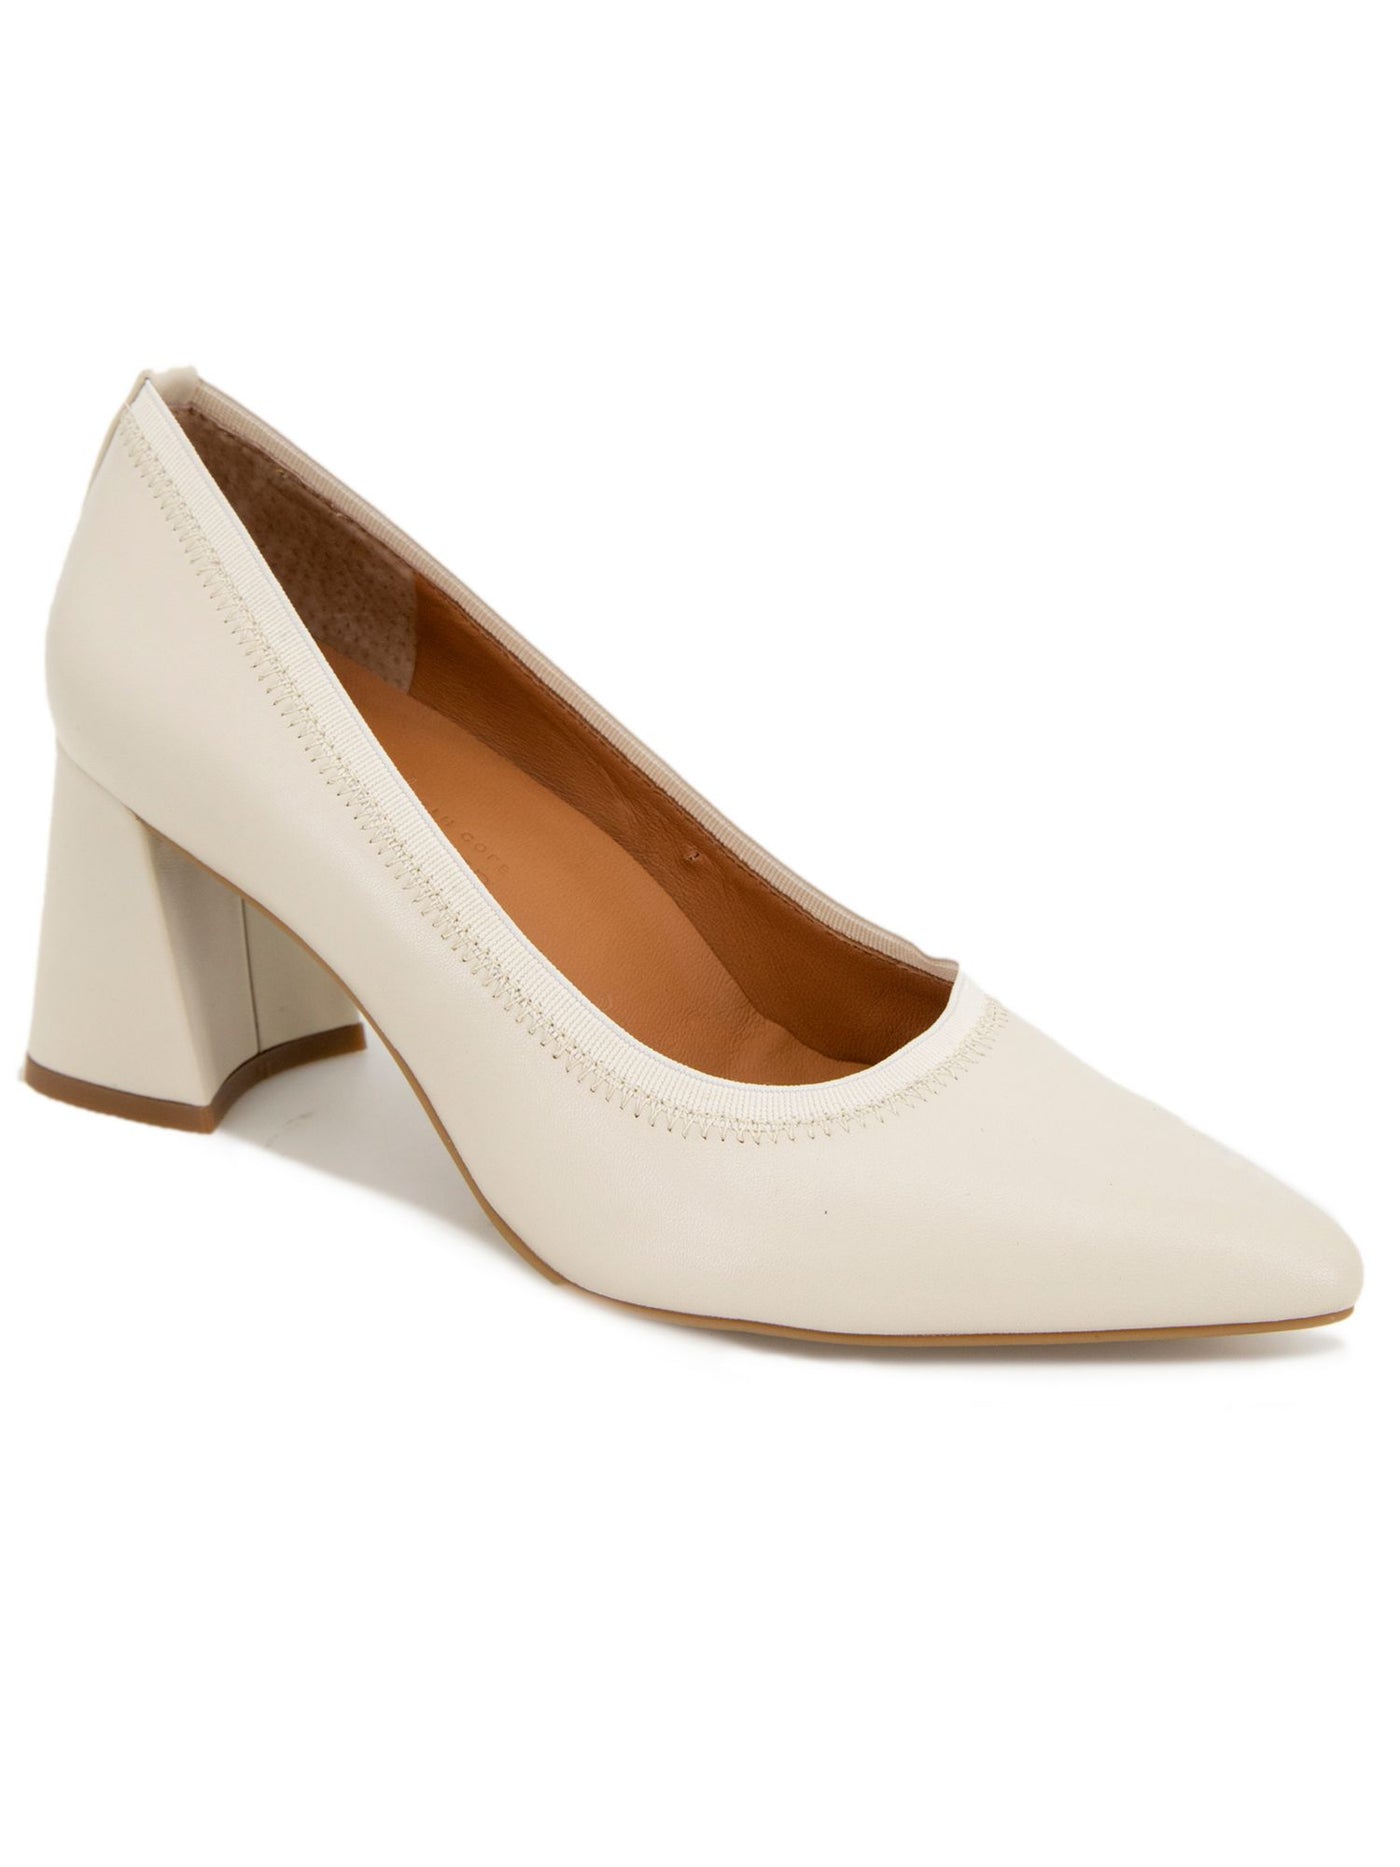 GENTLE SOULS KENNETH COLE Womens Beige Cushioned Dionne Pointed Toe Flare Slip On Pumps Shoes 9 M